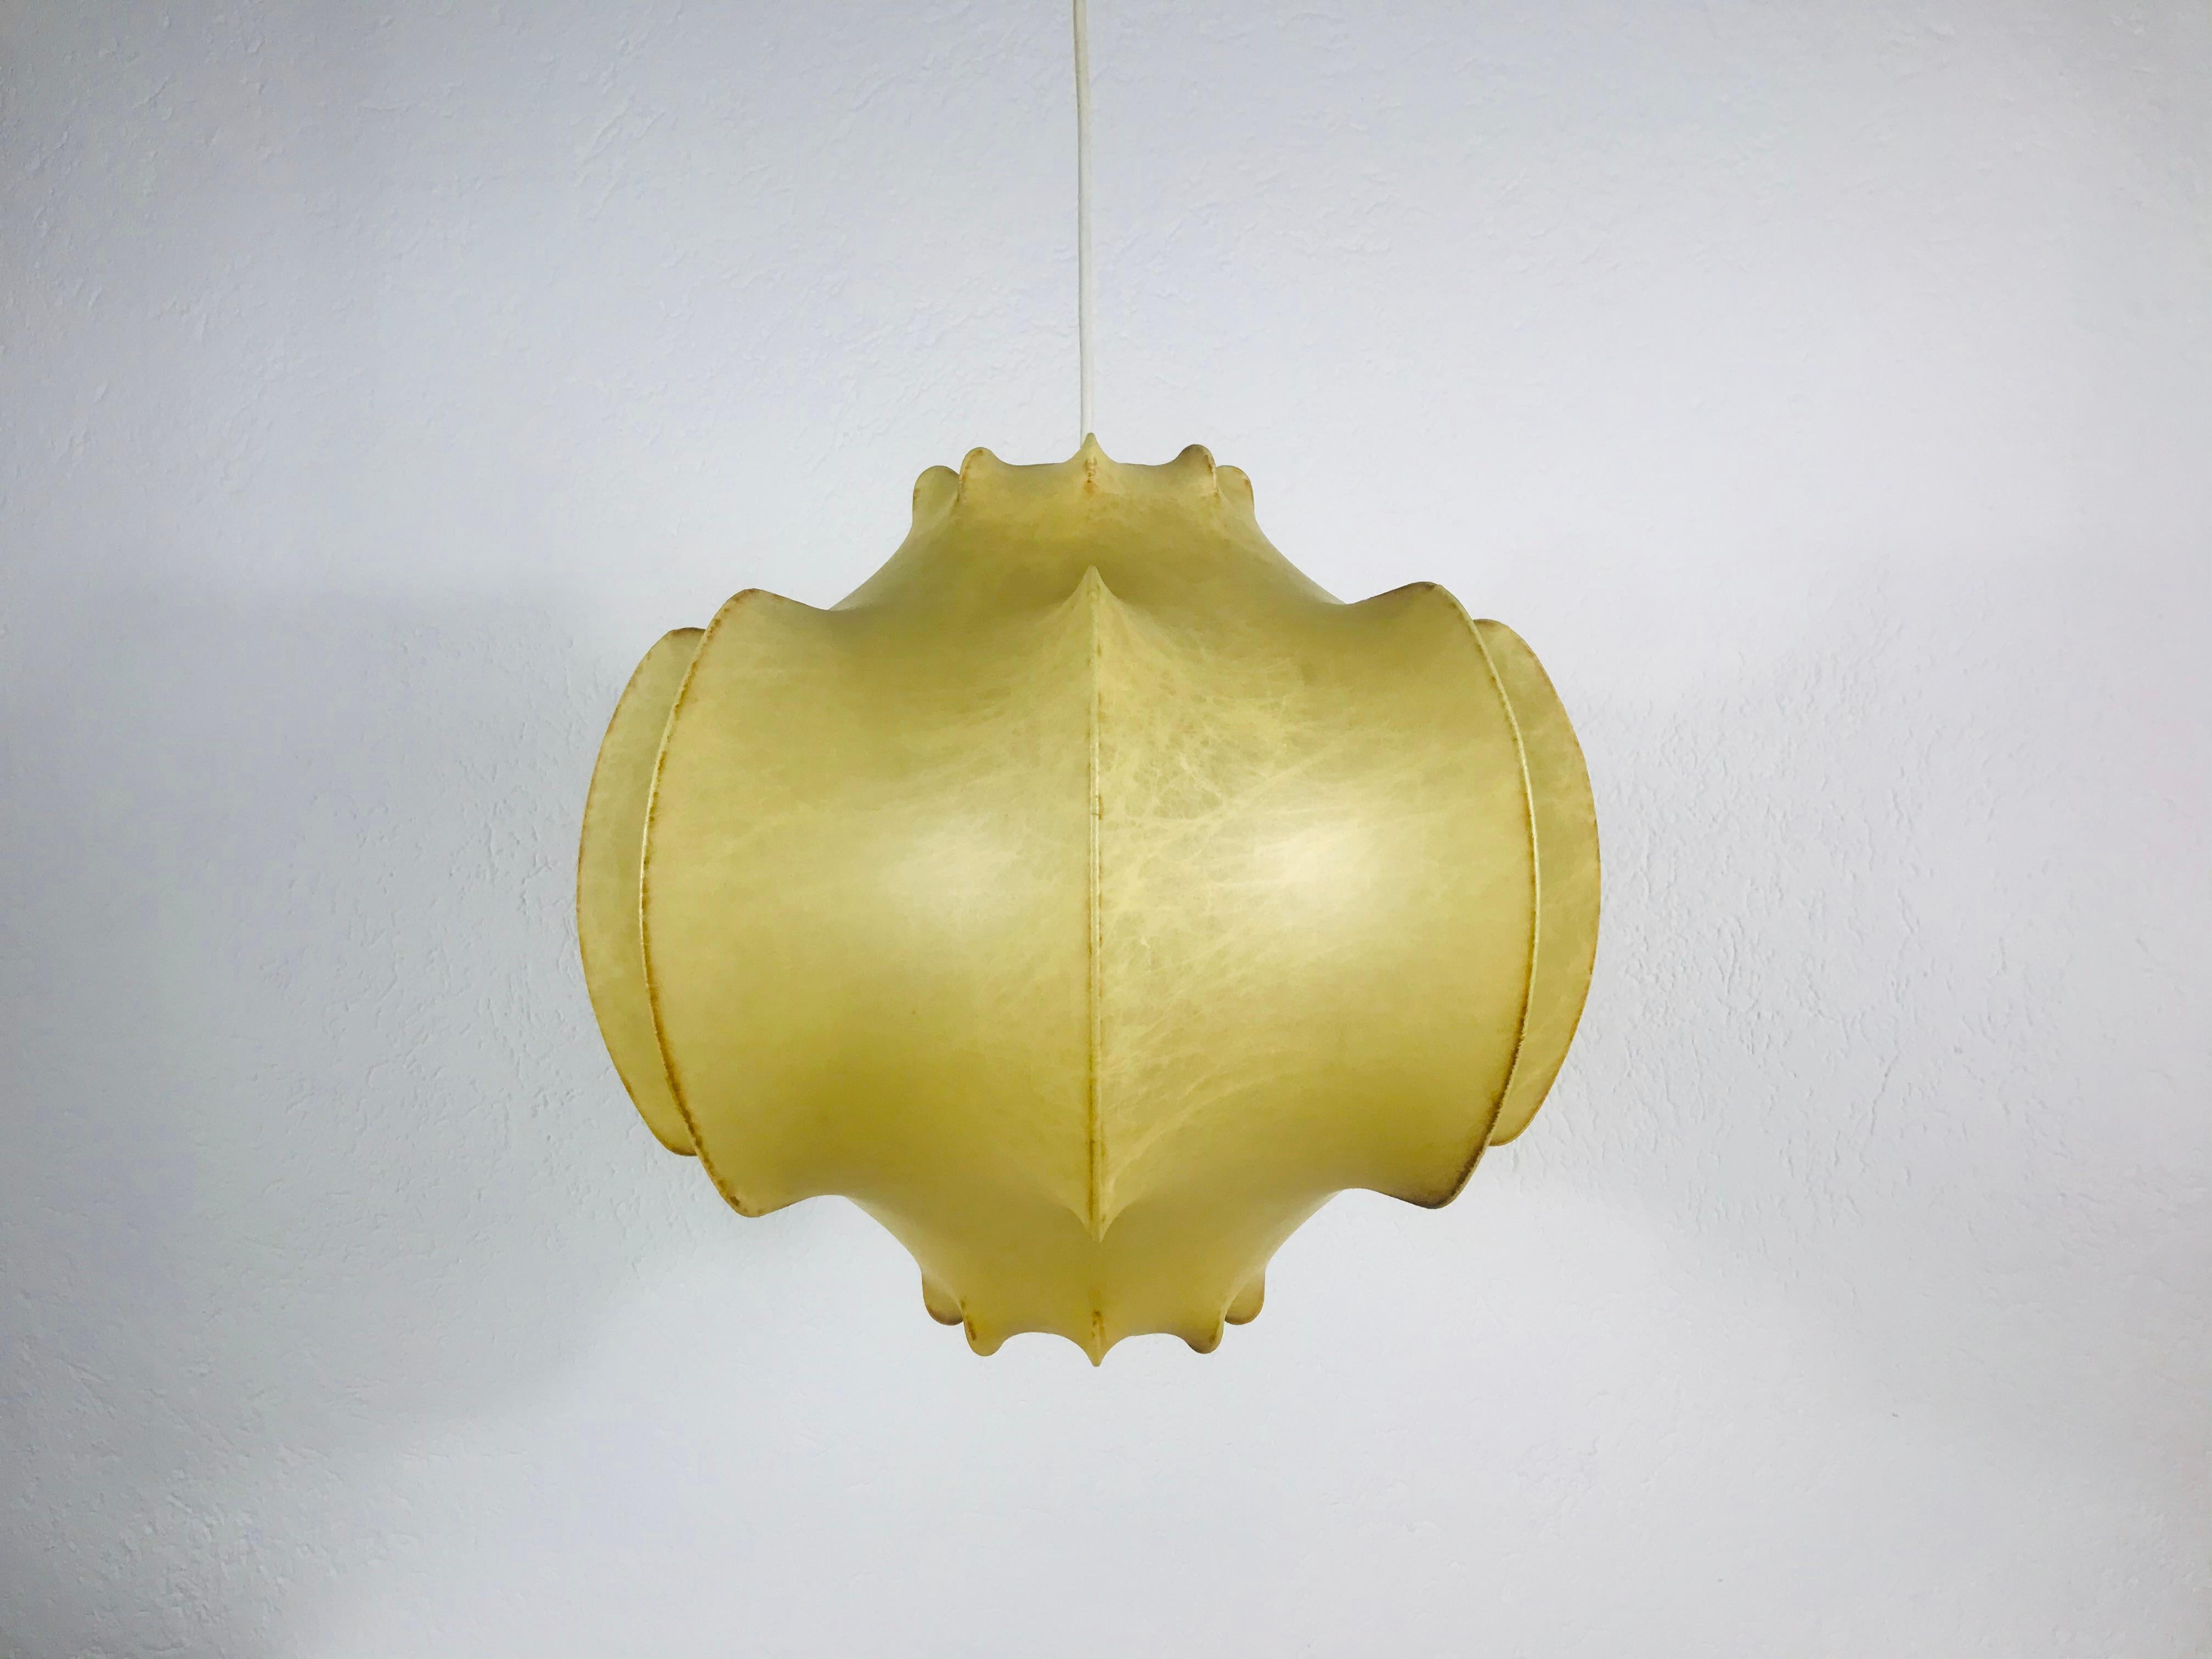 Viscontea pendant lamp made in Italy in the 1960s. The hanging lamp has been designed by Achille and Pier Giacomo Castiglioni for Flos. The lamp shade is of original resin.

Measures: Height of shade 31 cm

Total height 120 cm

Height of shade 37